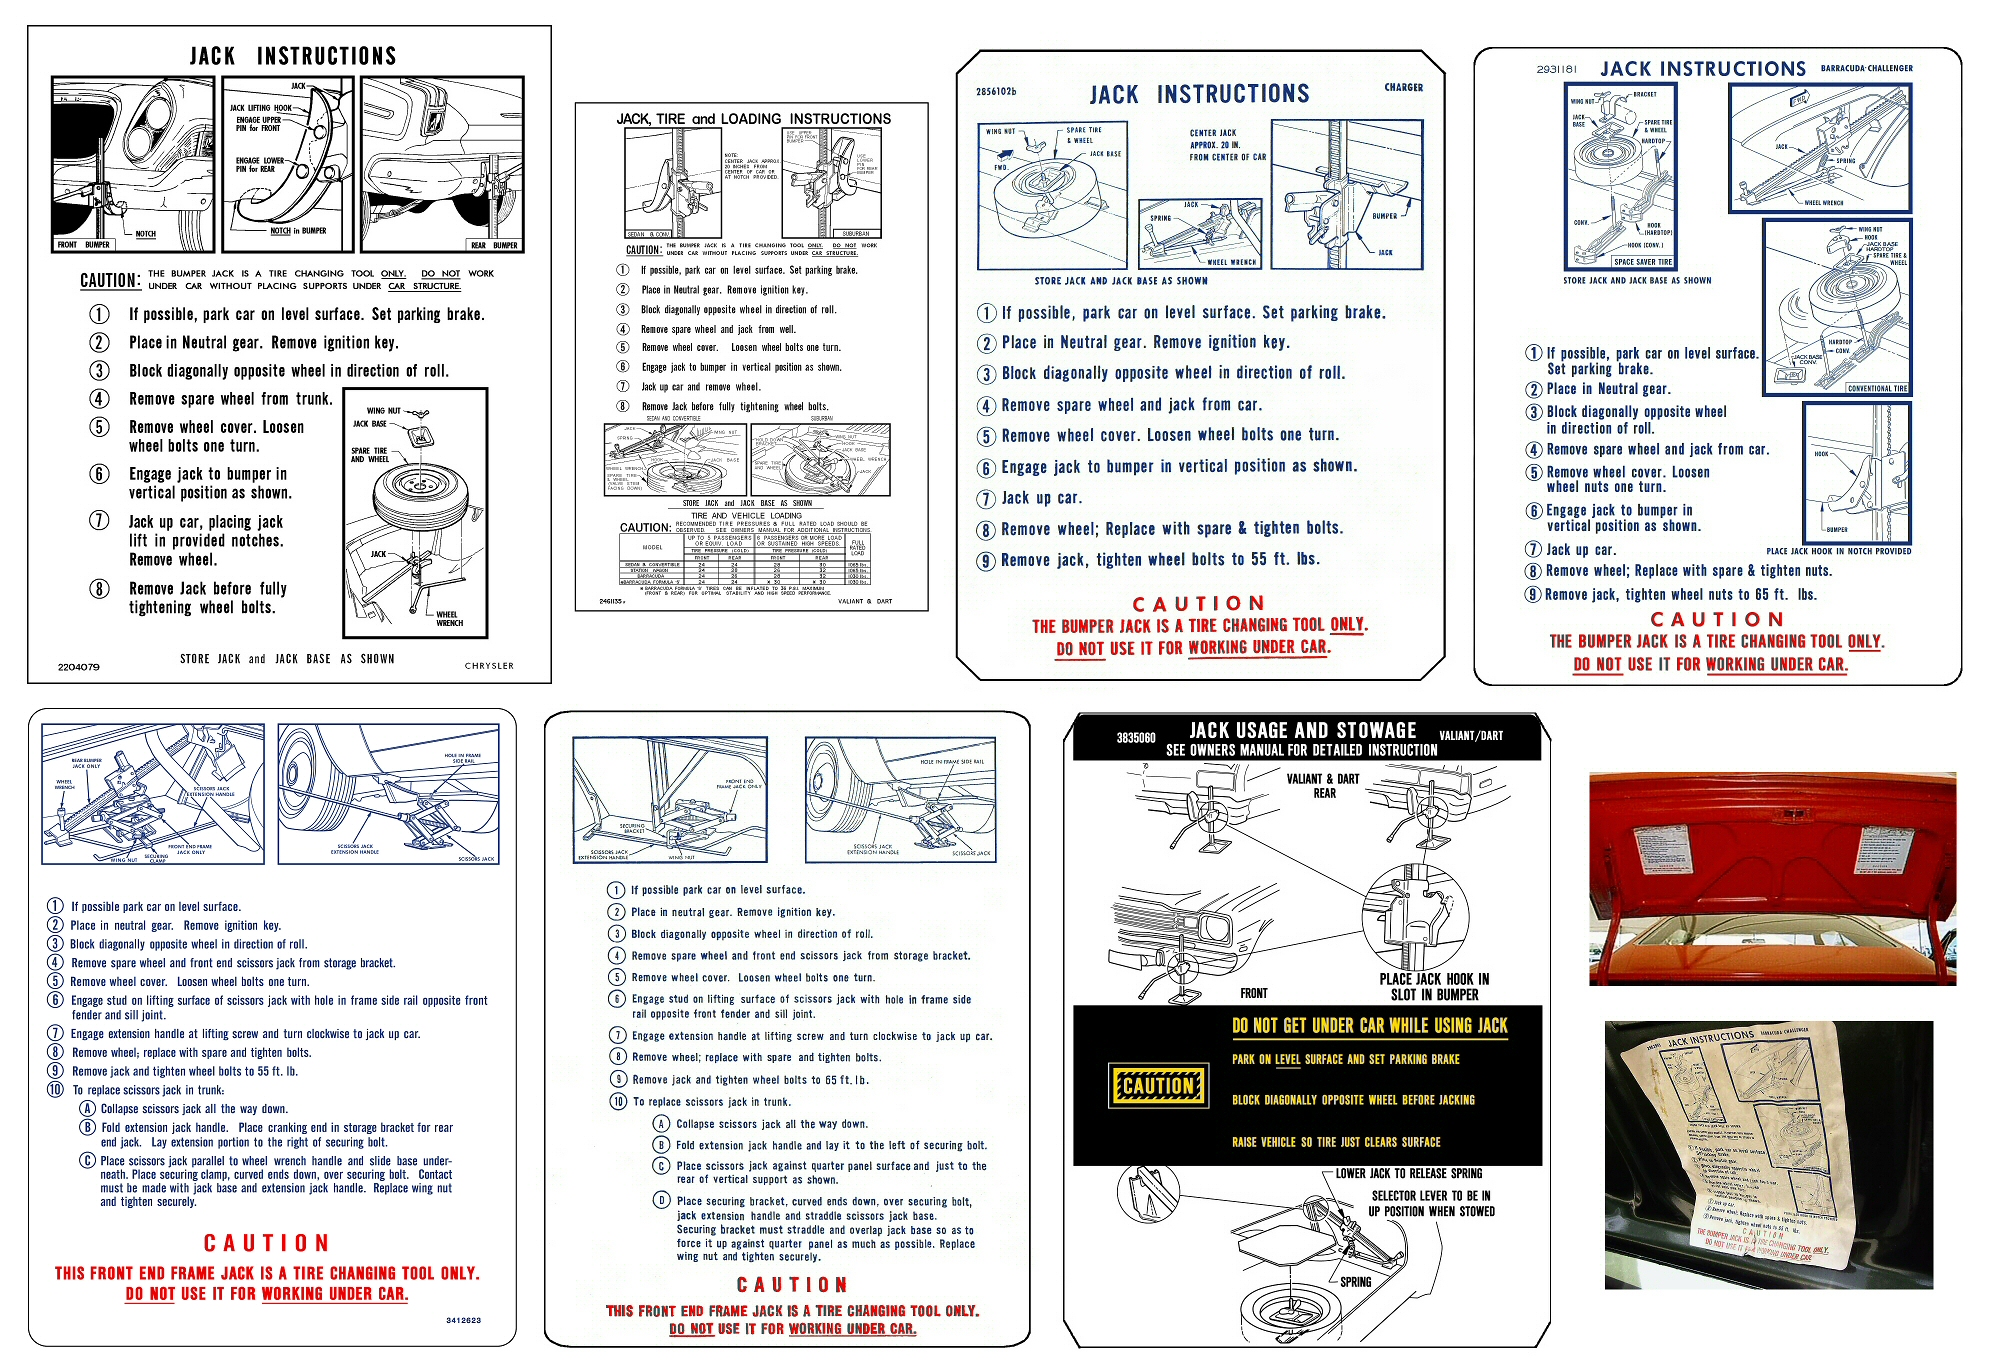 Jacking Instructions Decals: Mopar, Chrysler, Plymouth, Dodge